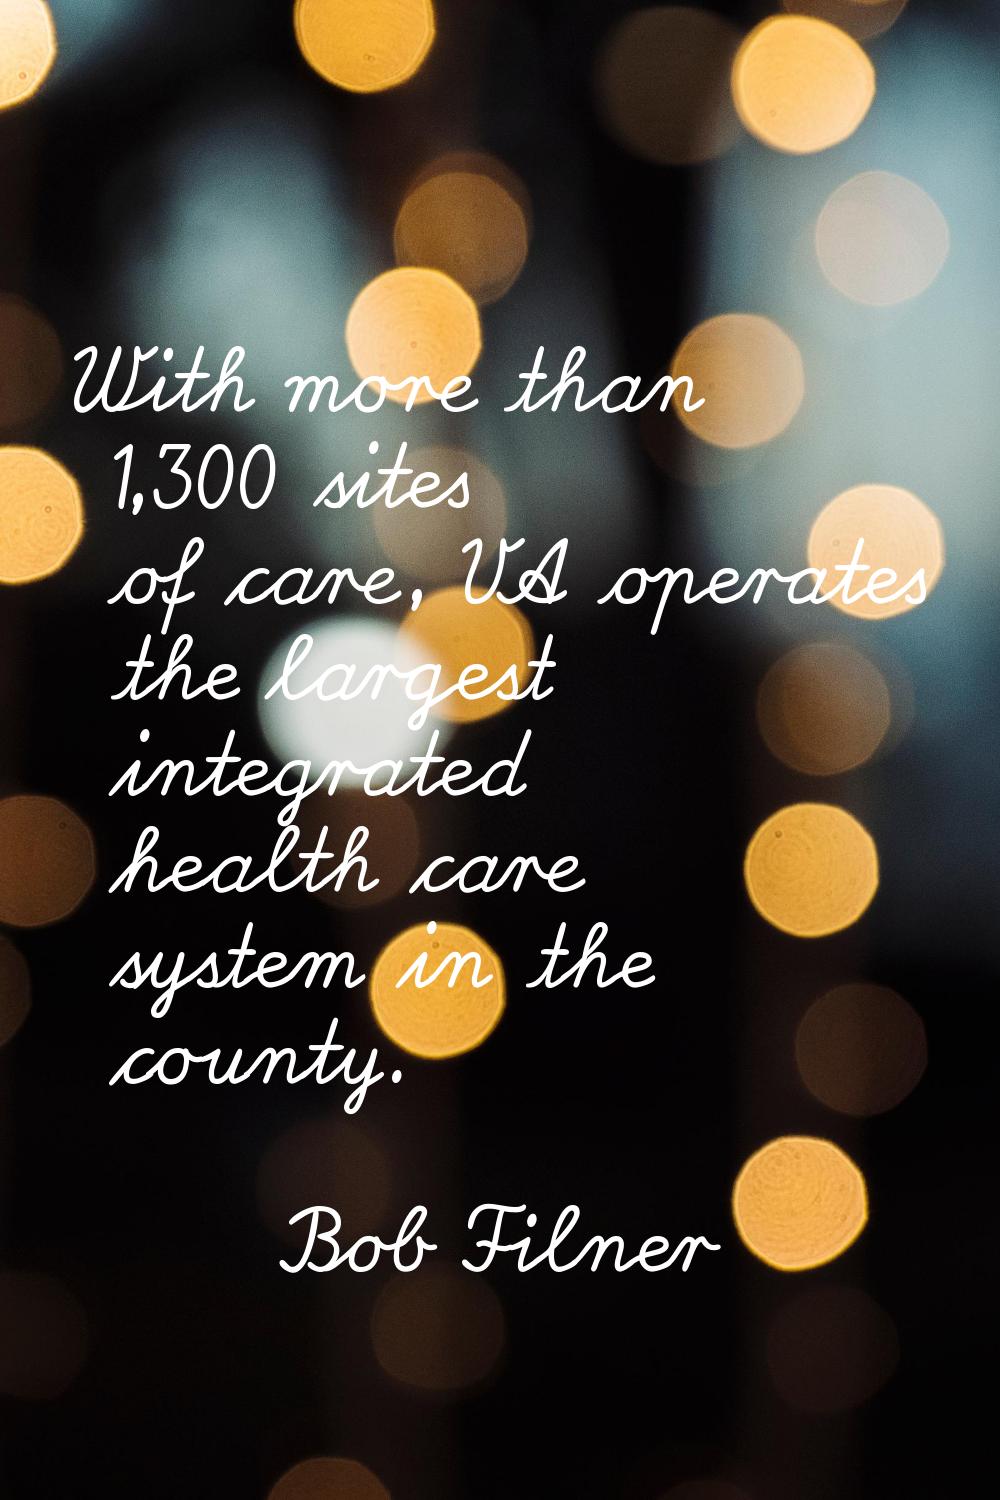 With more than 1,300 sites of care, VA operates the largest integrated health care system in the co